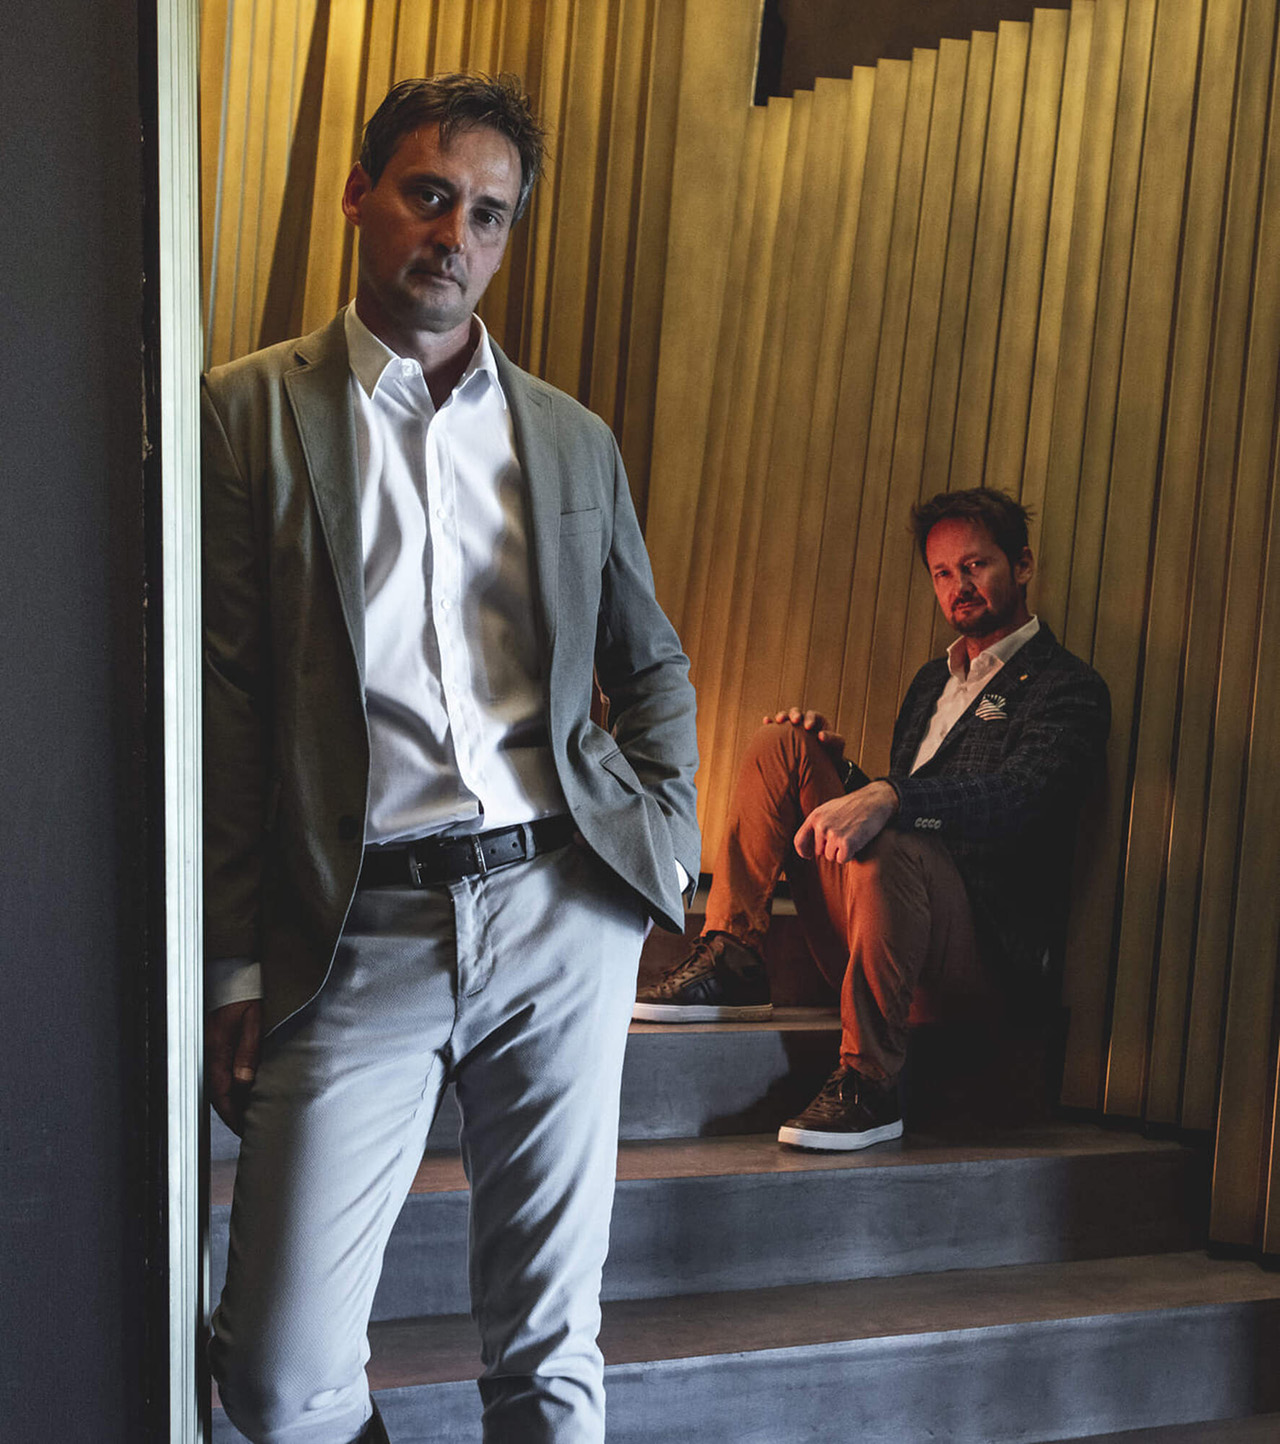 Two men wearing suits, one sitting on the stairs the other learning against a wall.